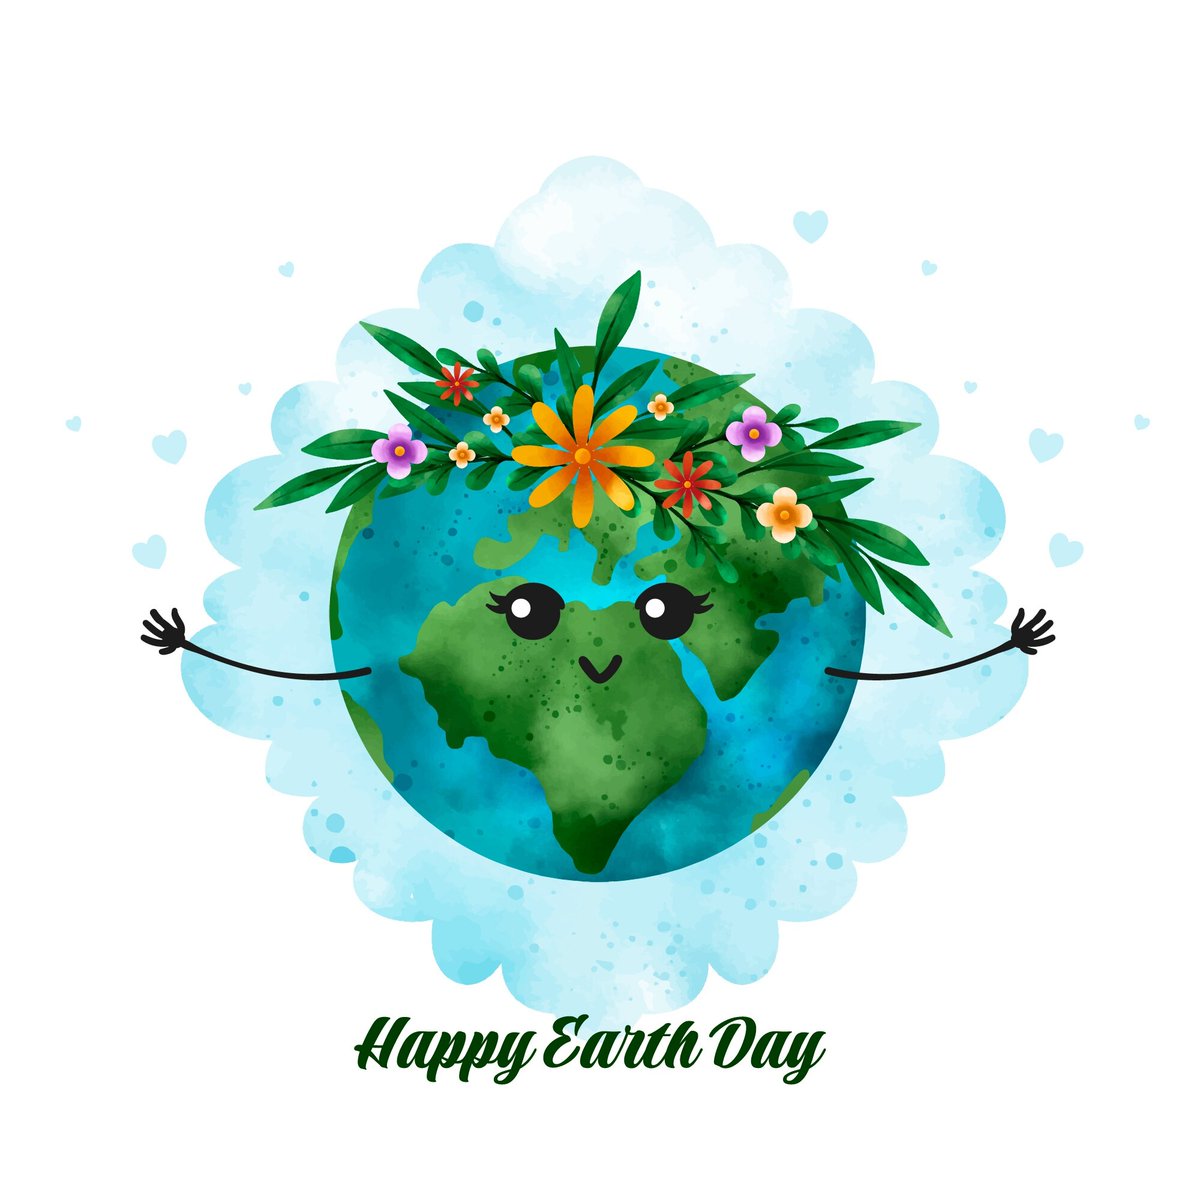 Happy Earth Day! 🌎🌿

The theme for World Earth Day 2024 is Planet vs Plastics. The theme aims to bring attention to the serious issue of plastic pollution and how it harms nature.

#earthday #earthday2024 #everydayisearthday #savetheplanet #recycle #recycling #recycleplastic